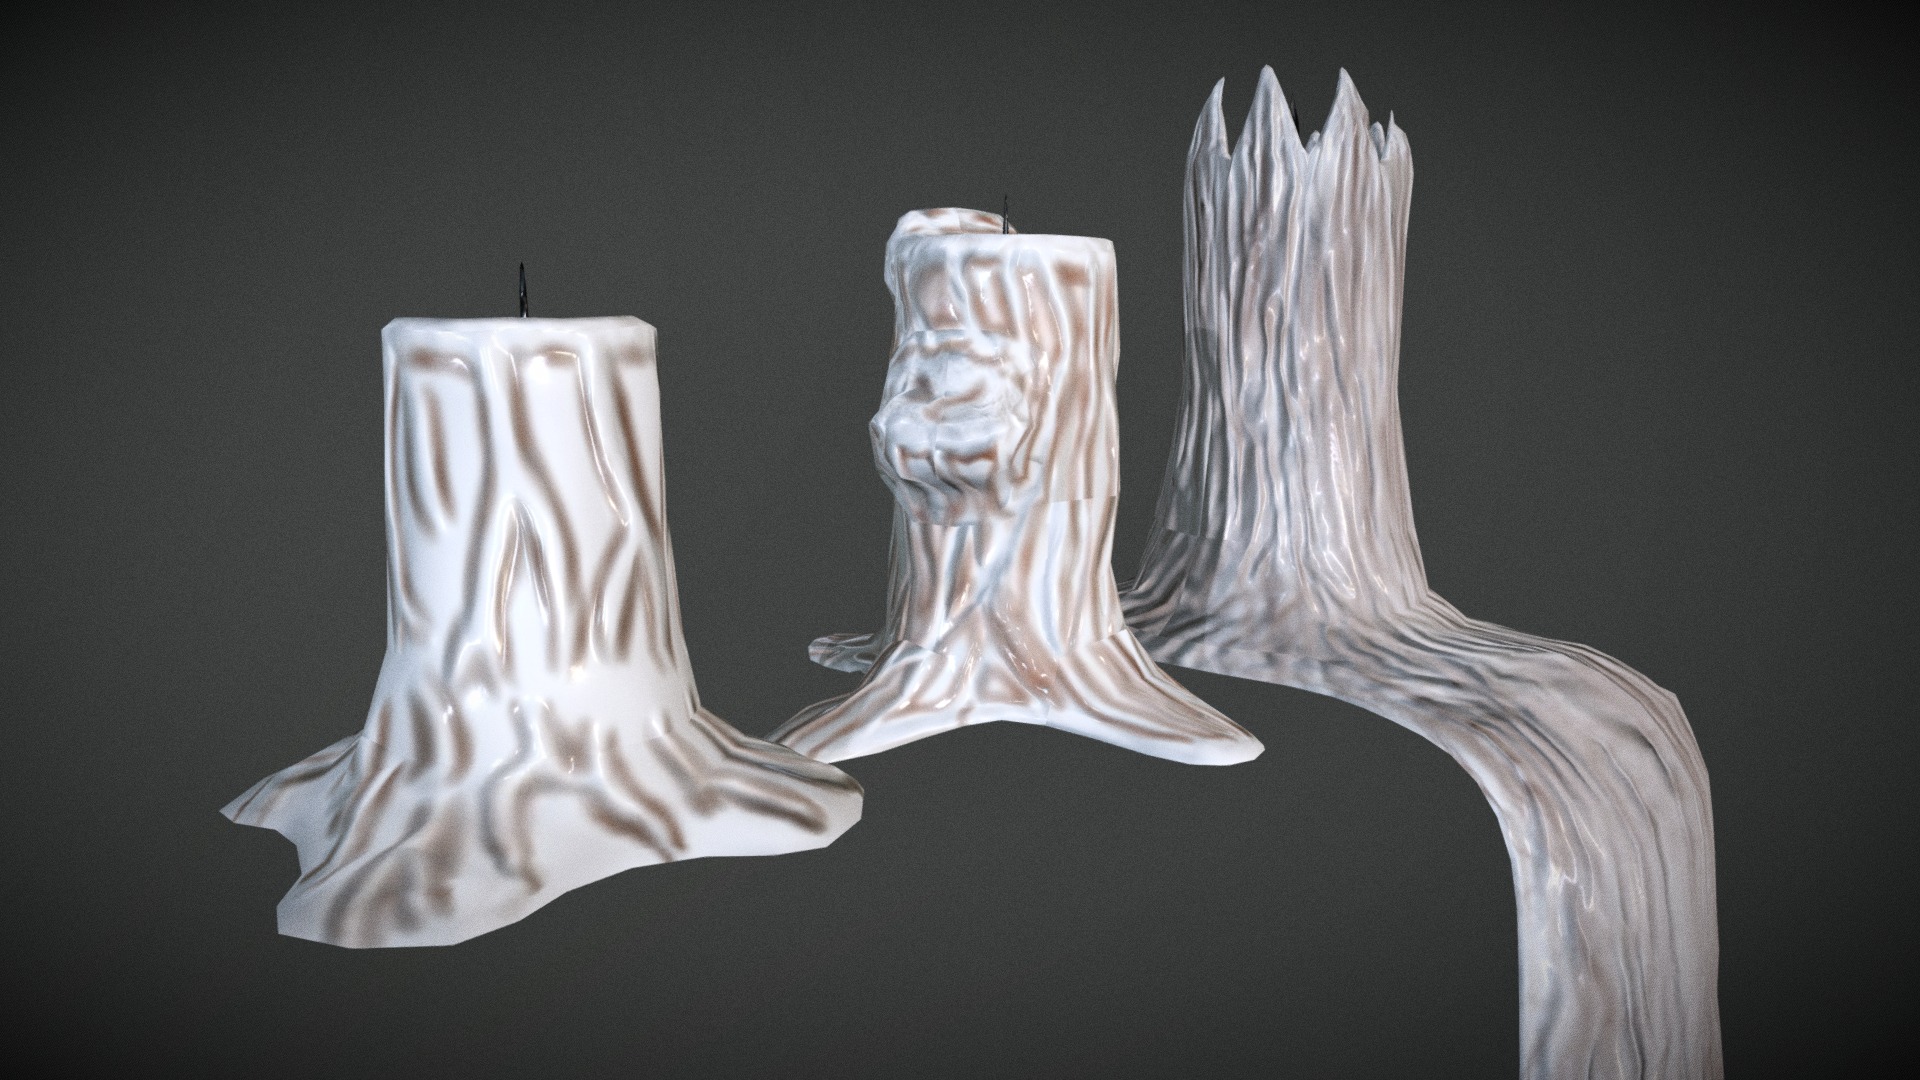 3D model Olds Candles - This is a 3D model of the Olds Candles. The 3D model is about a light bulb with a human face.